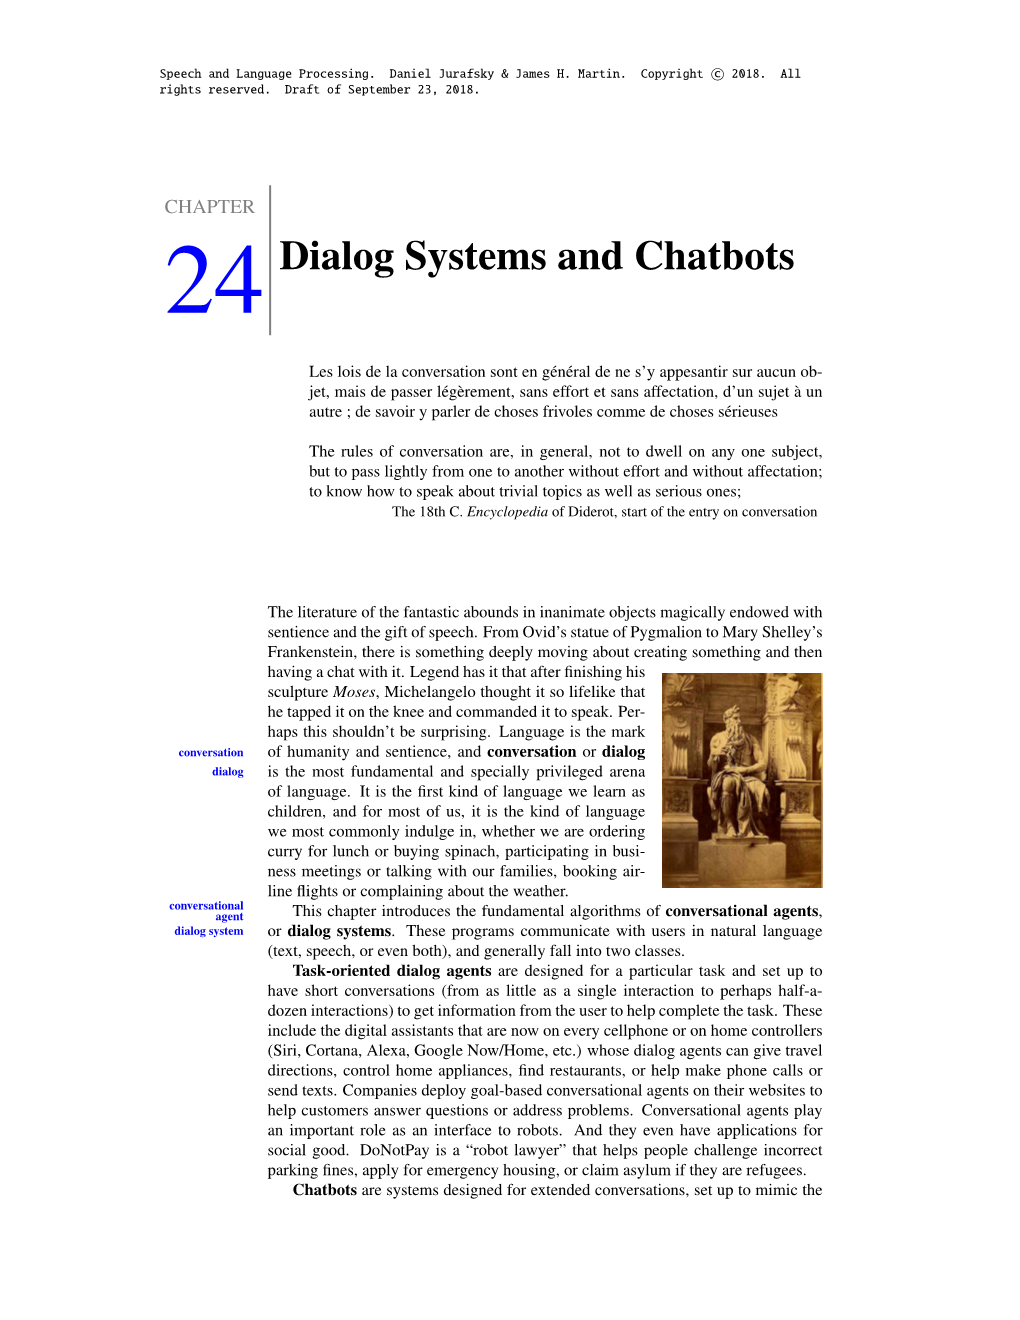 Dialog Systems and Chatbots